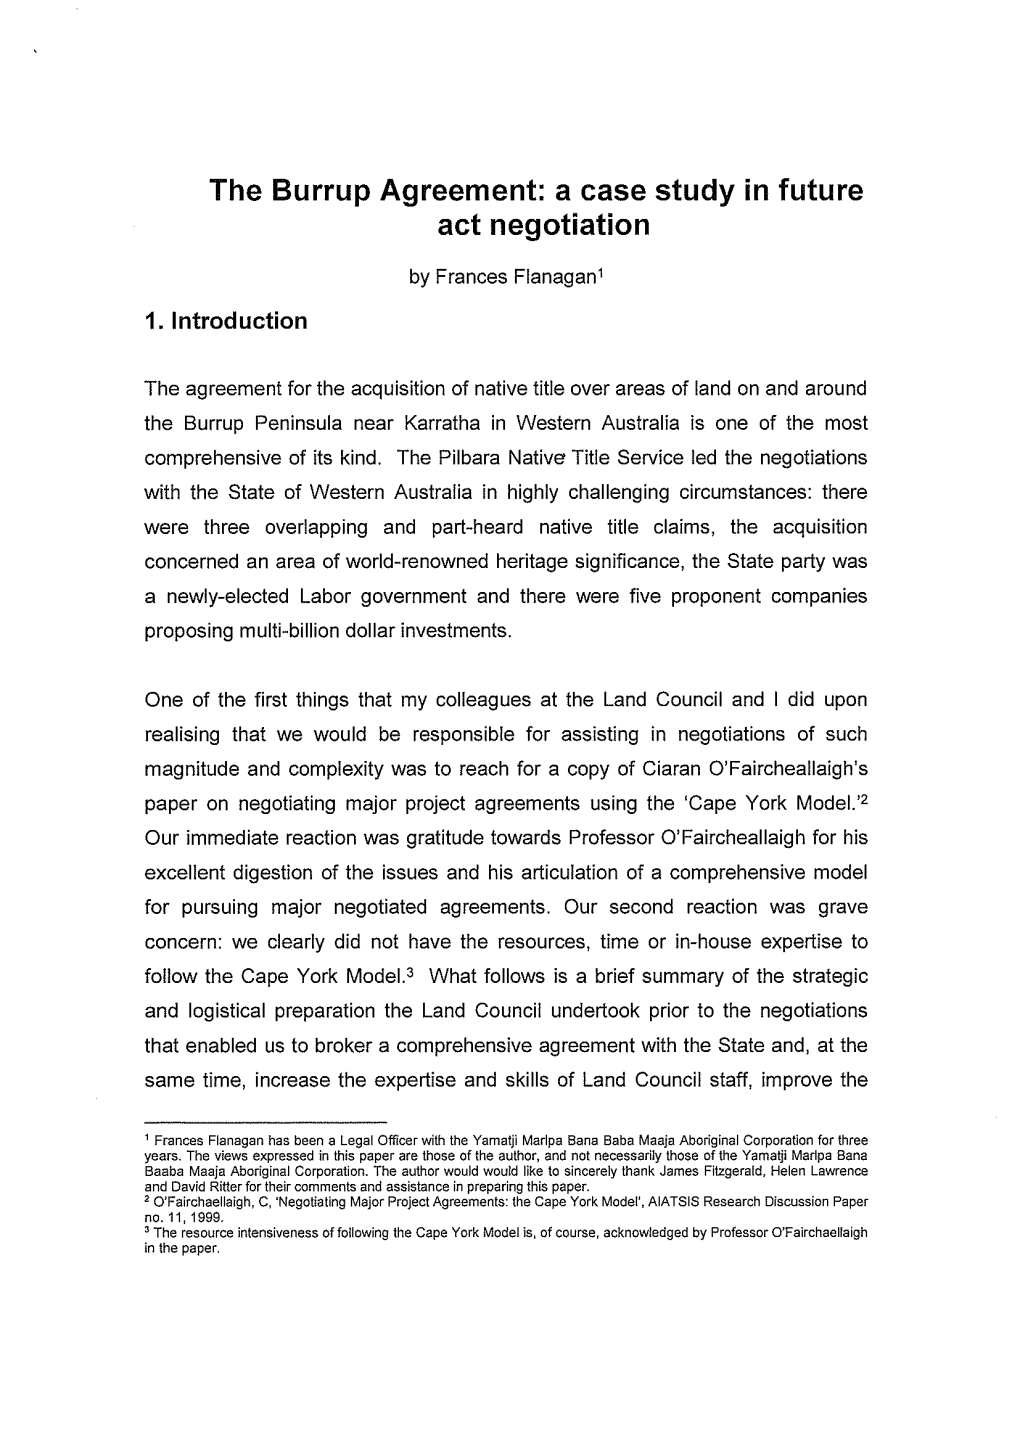 The Burrup Agreement: a Case Study in Future Act Negotiation